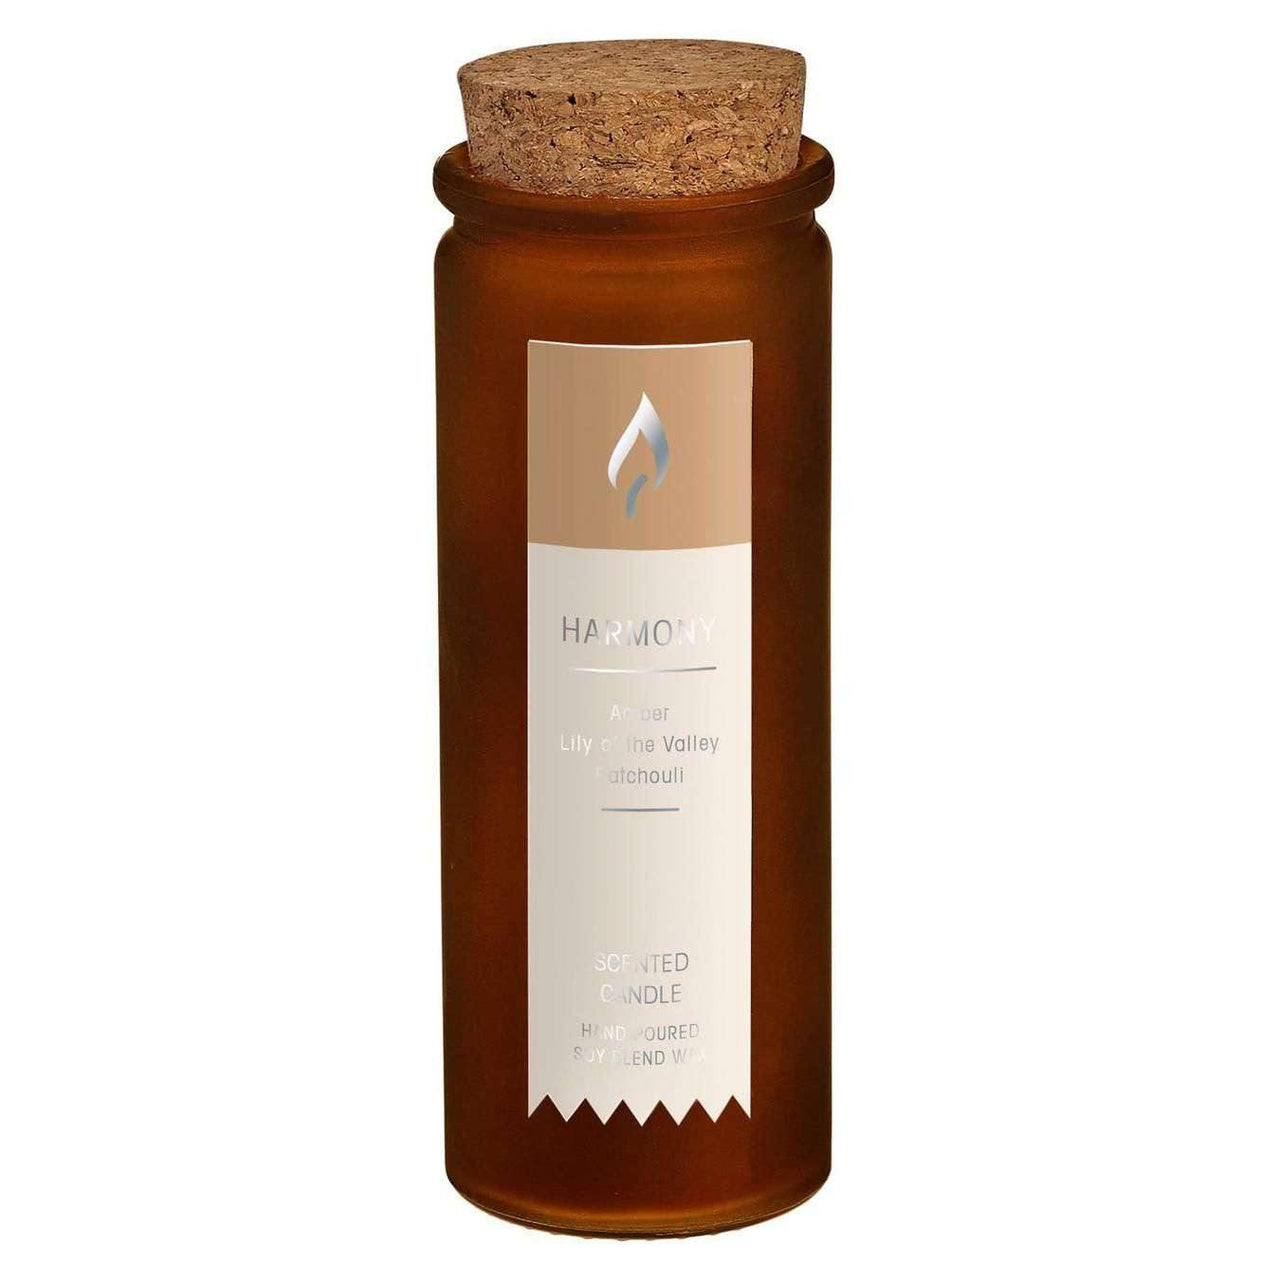 Harmony Scent Tincture Bottle Candle - The Fox Decor